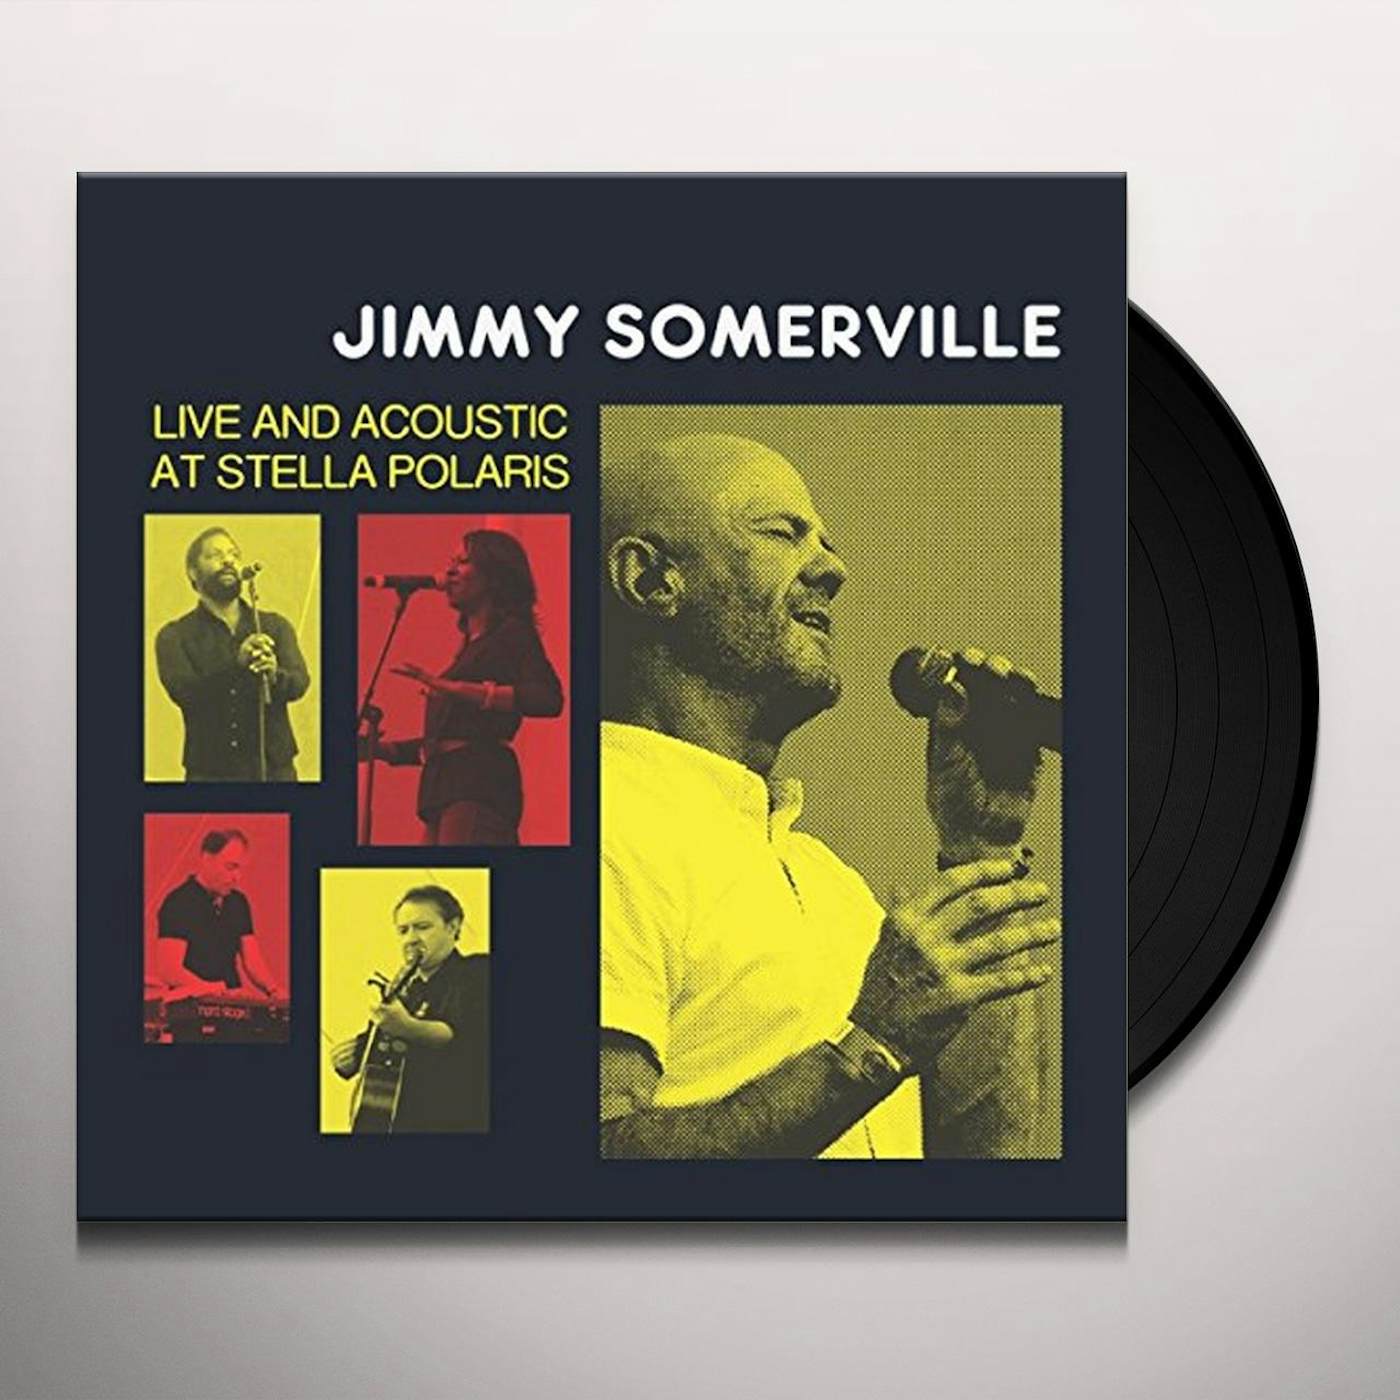 Jimmy Somerville Live And Acoustic At Stella Polaris Vinyl Record